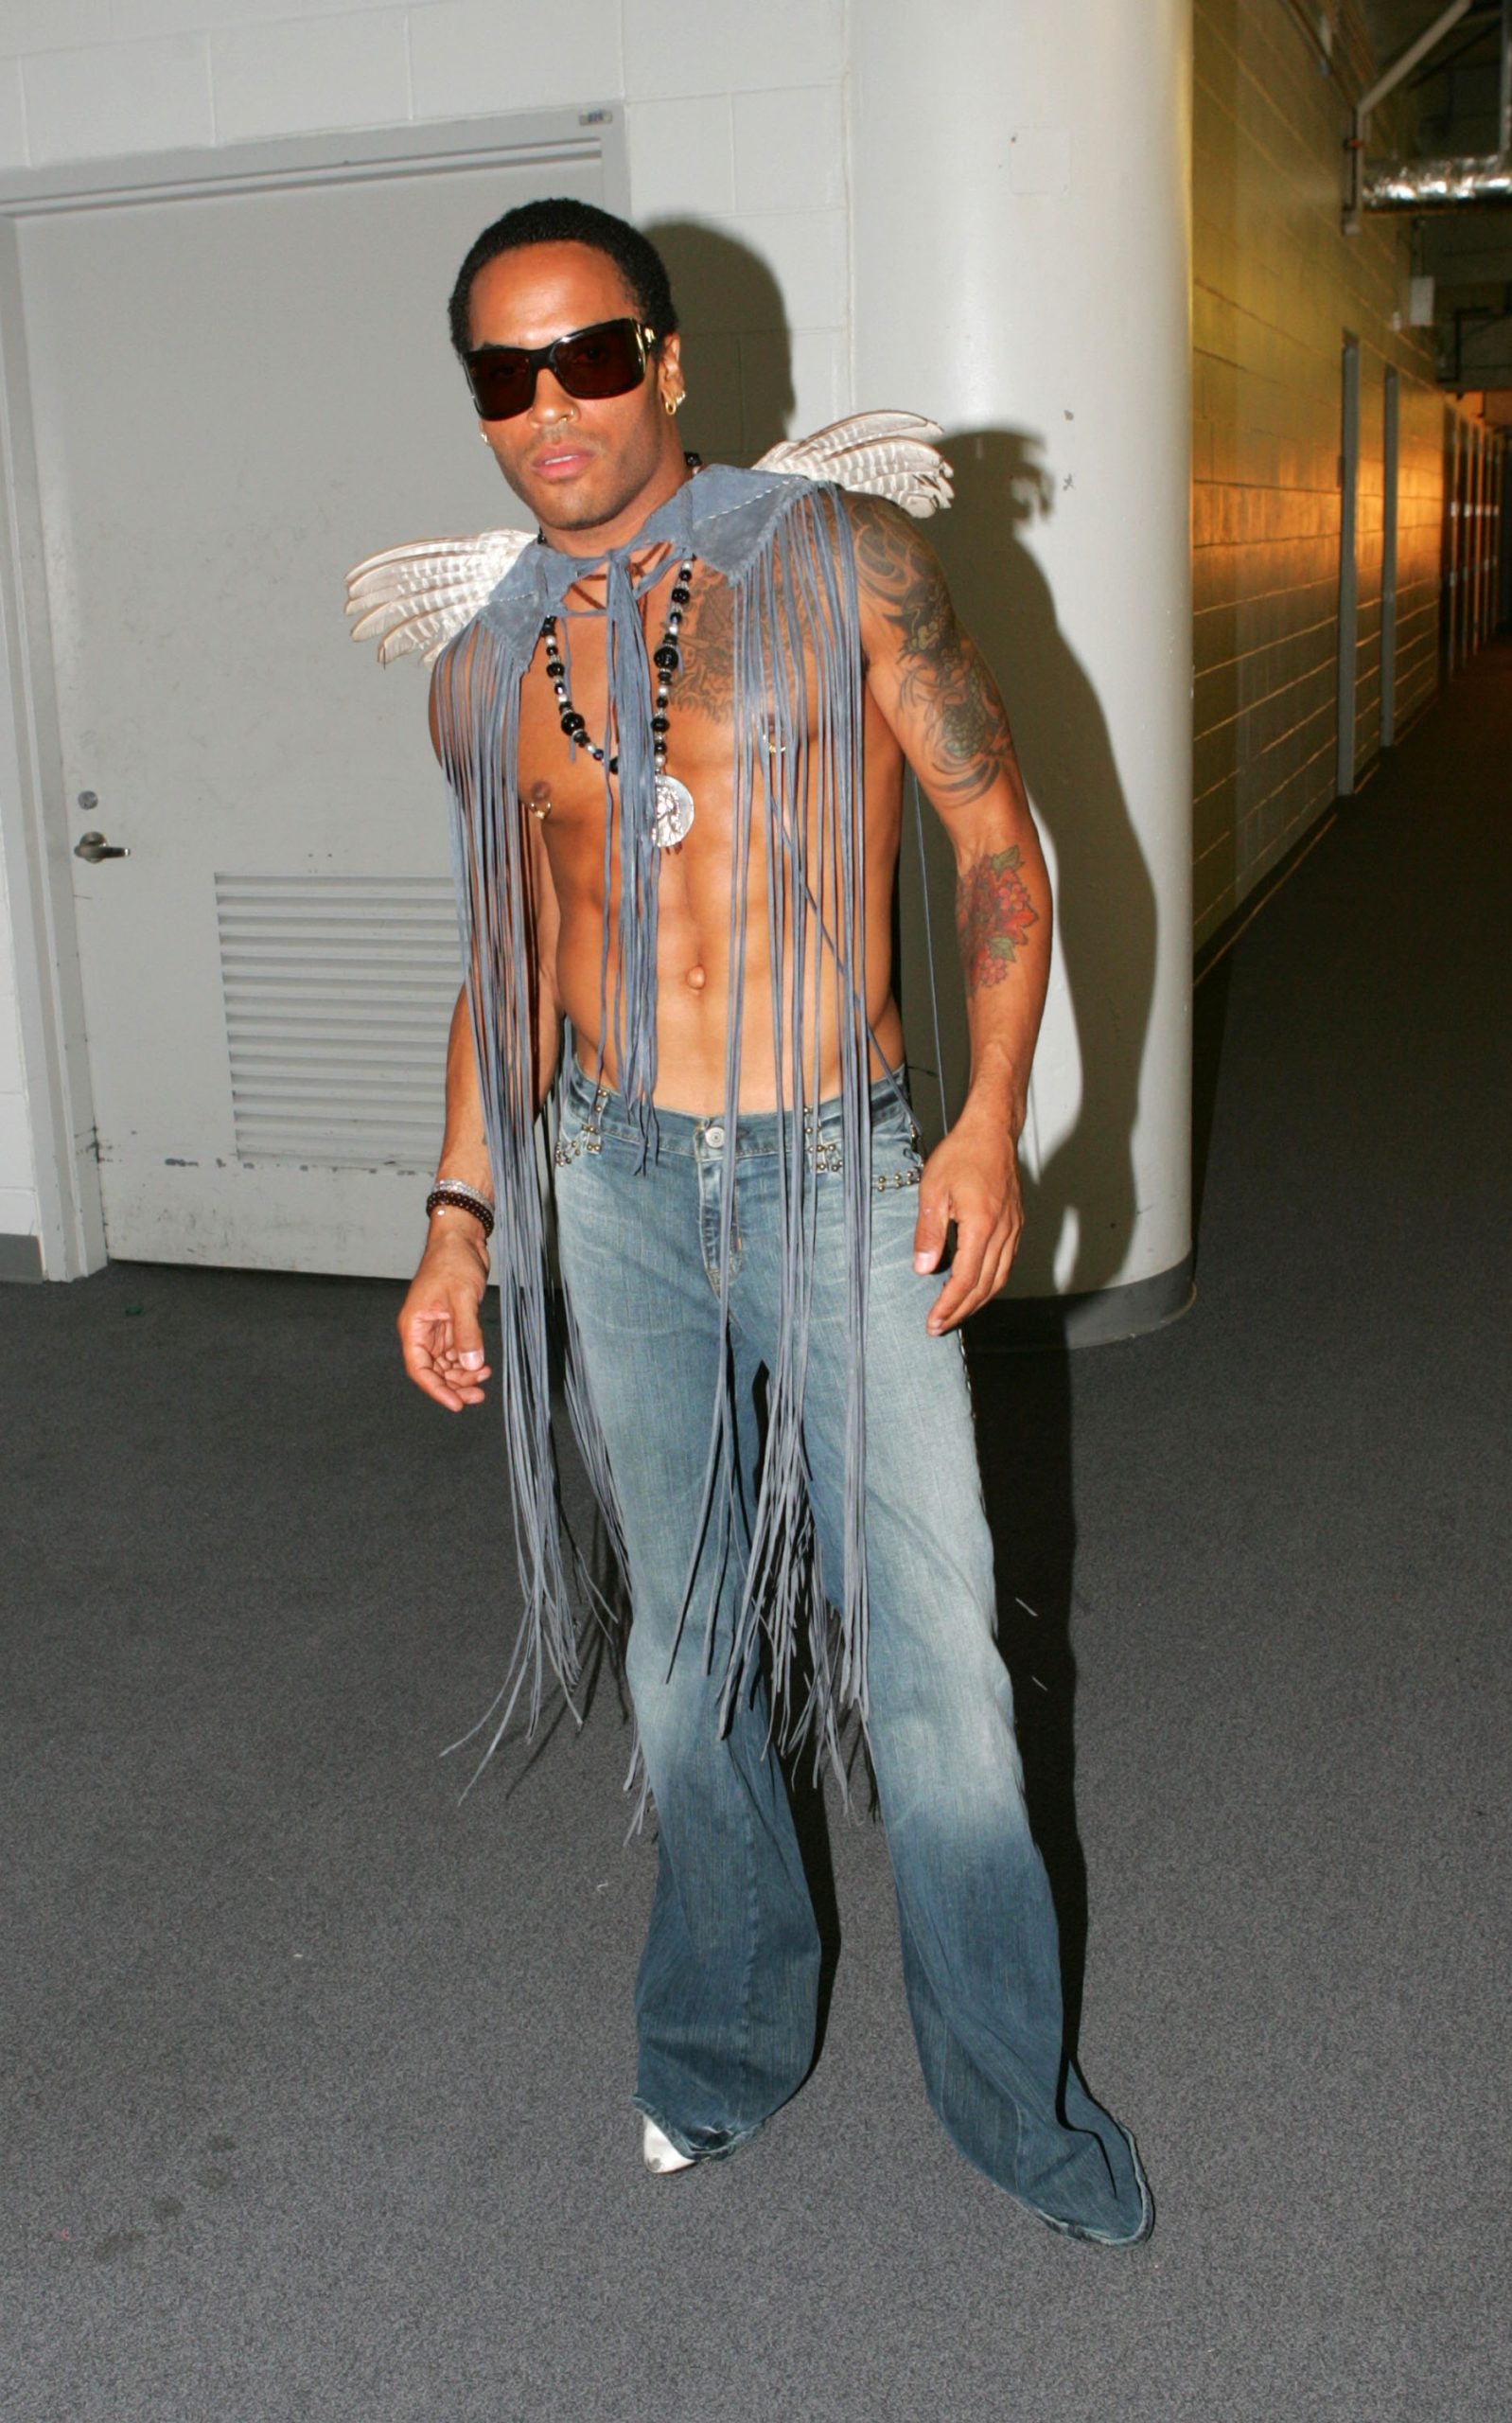 2022 CFDA: A Look At Lenny Kravitz's Best Fashion Moments